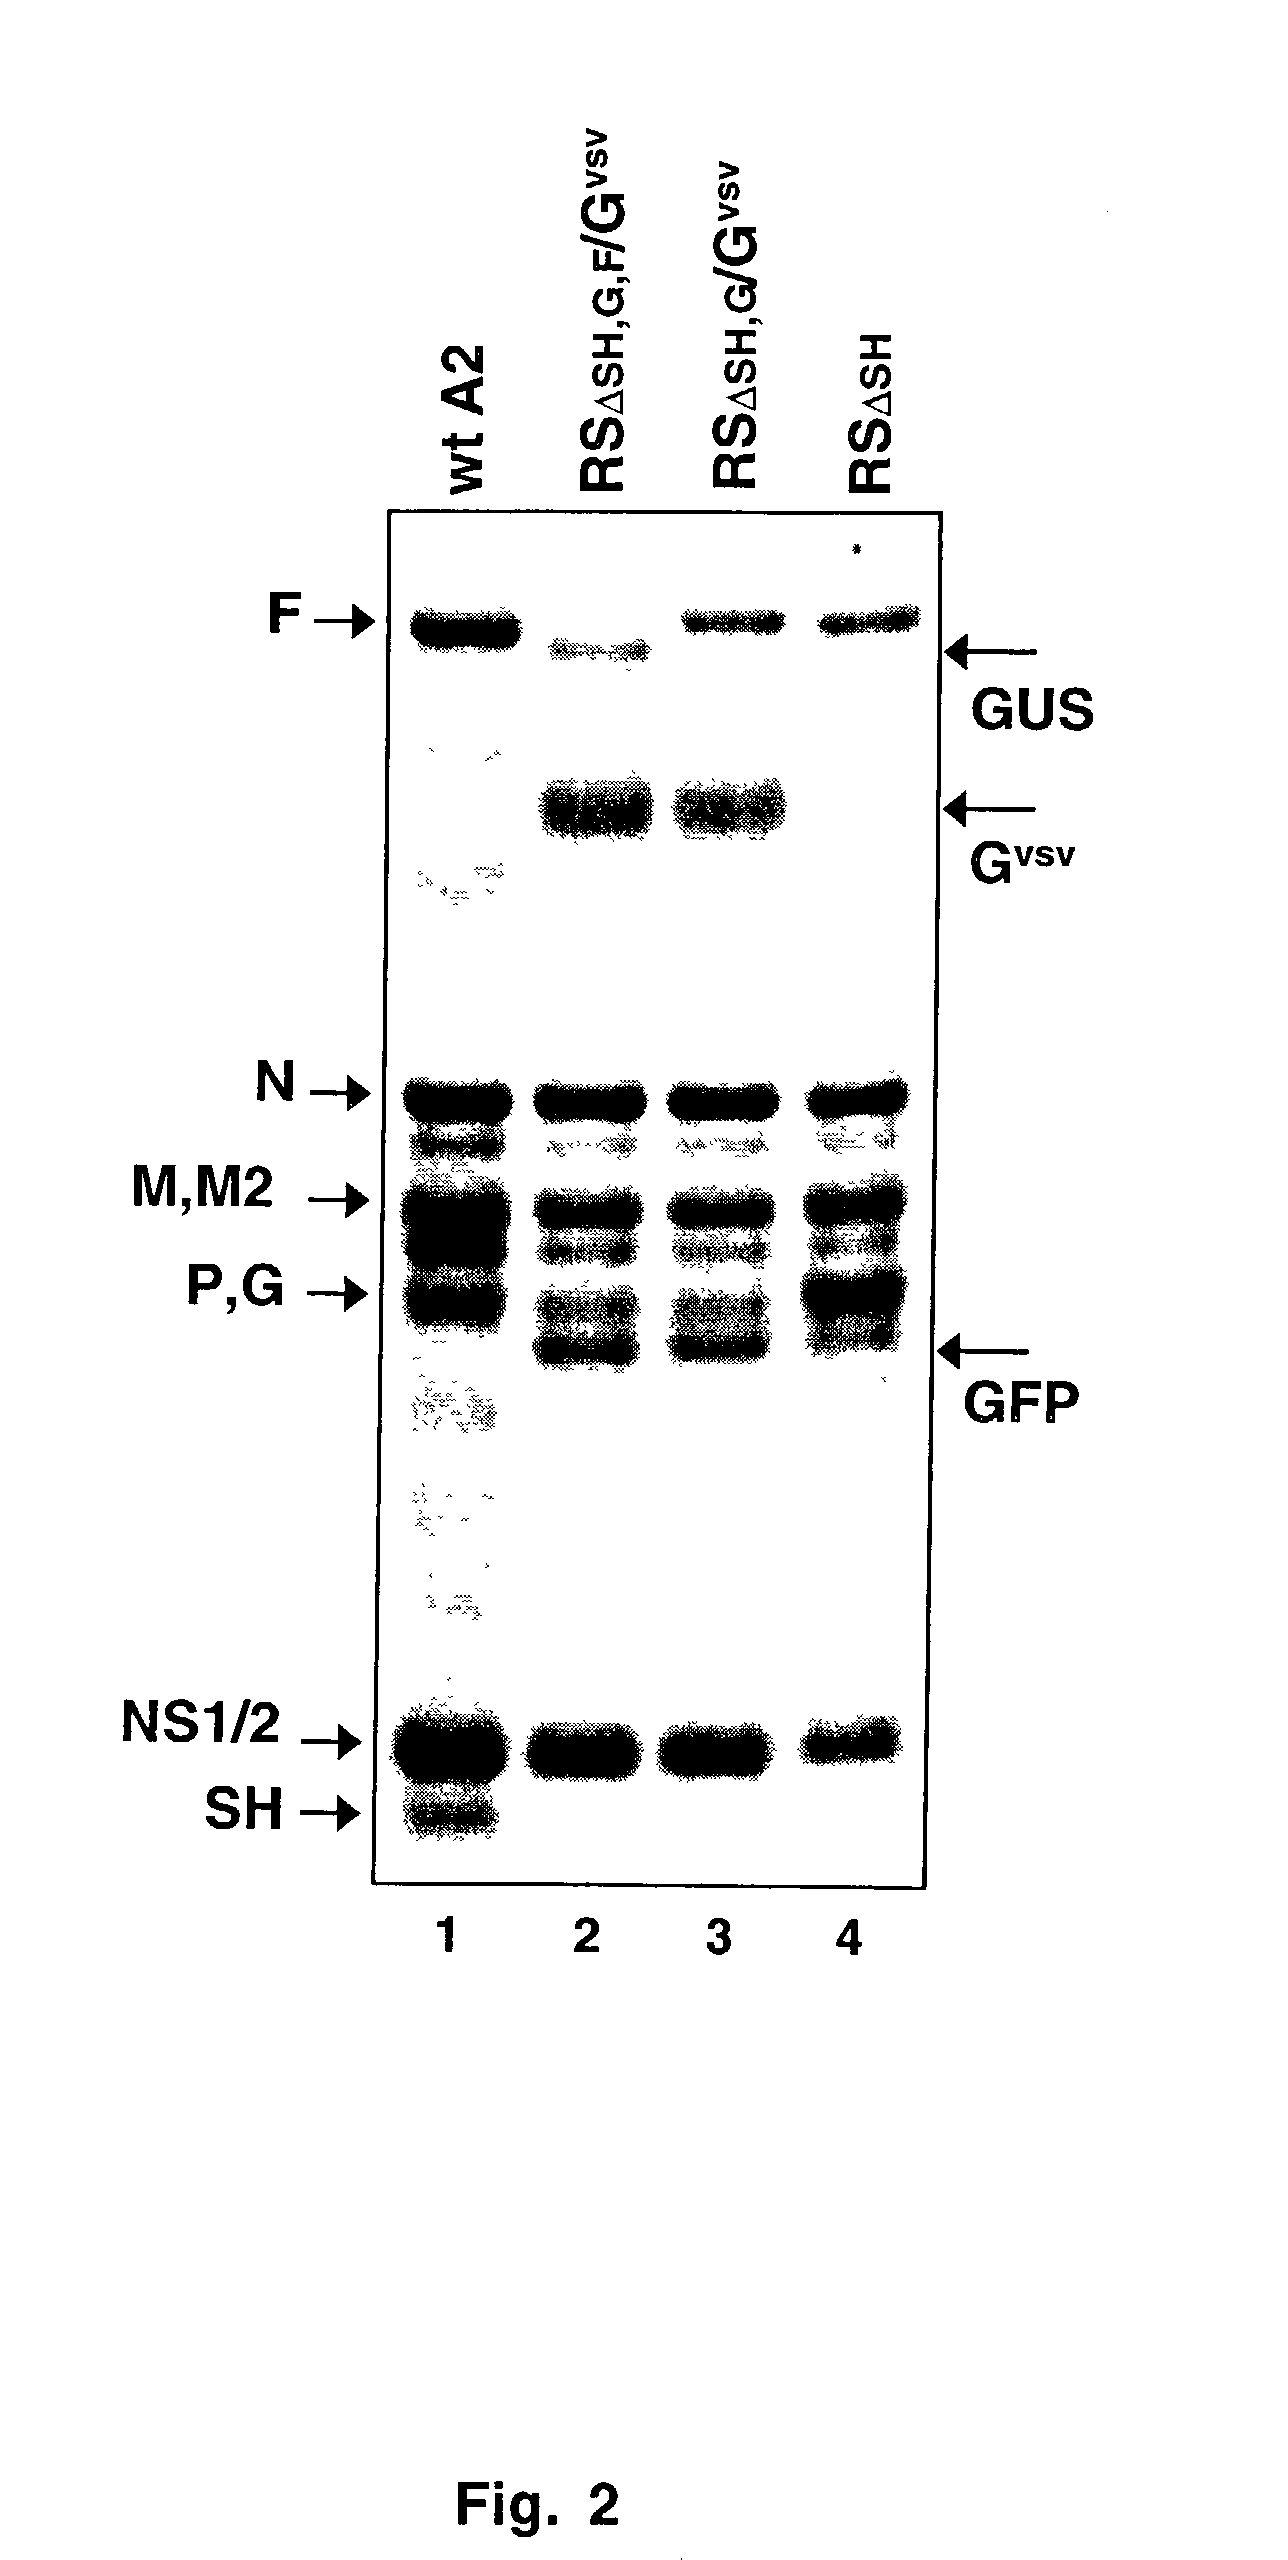 Recombinant respiratory syncytial viruses with deleted surface glycoprotein genes and uses thereof